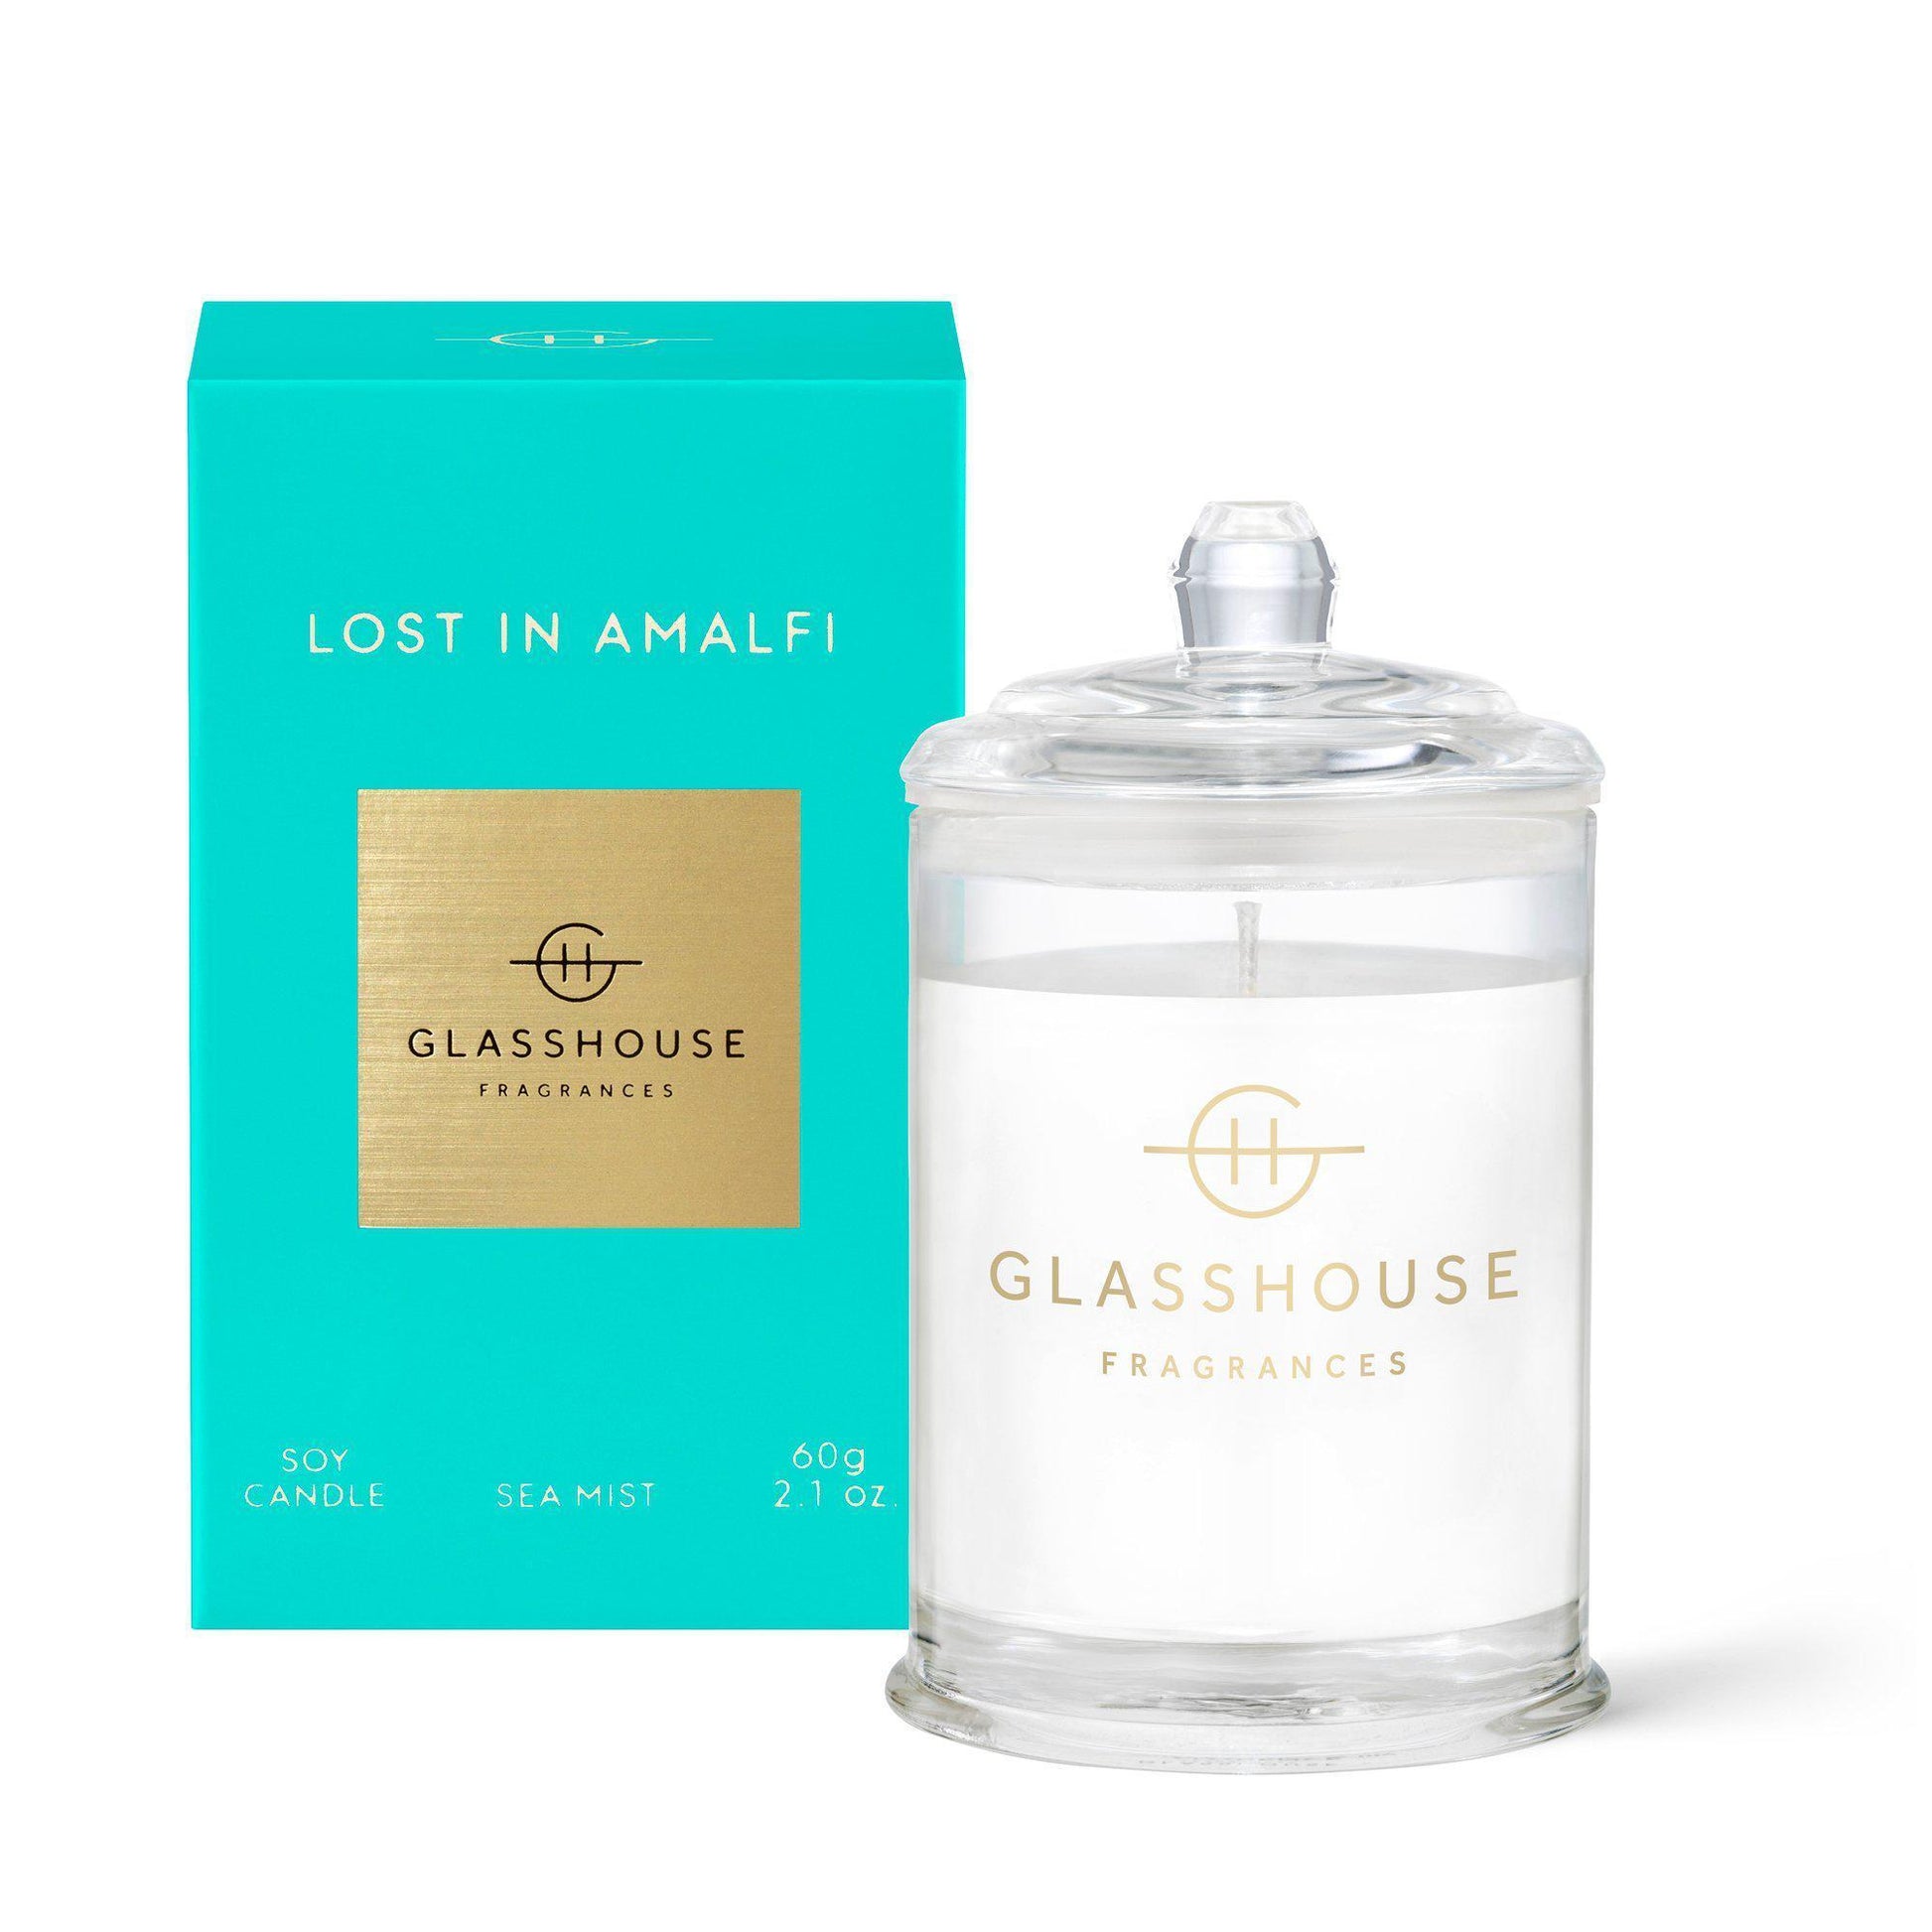 Candle 60g - Lost in Amalfi - Glasshouse Fragrances - FUDGE Gifts Home Lifestyle